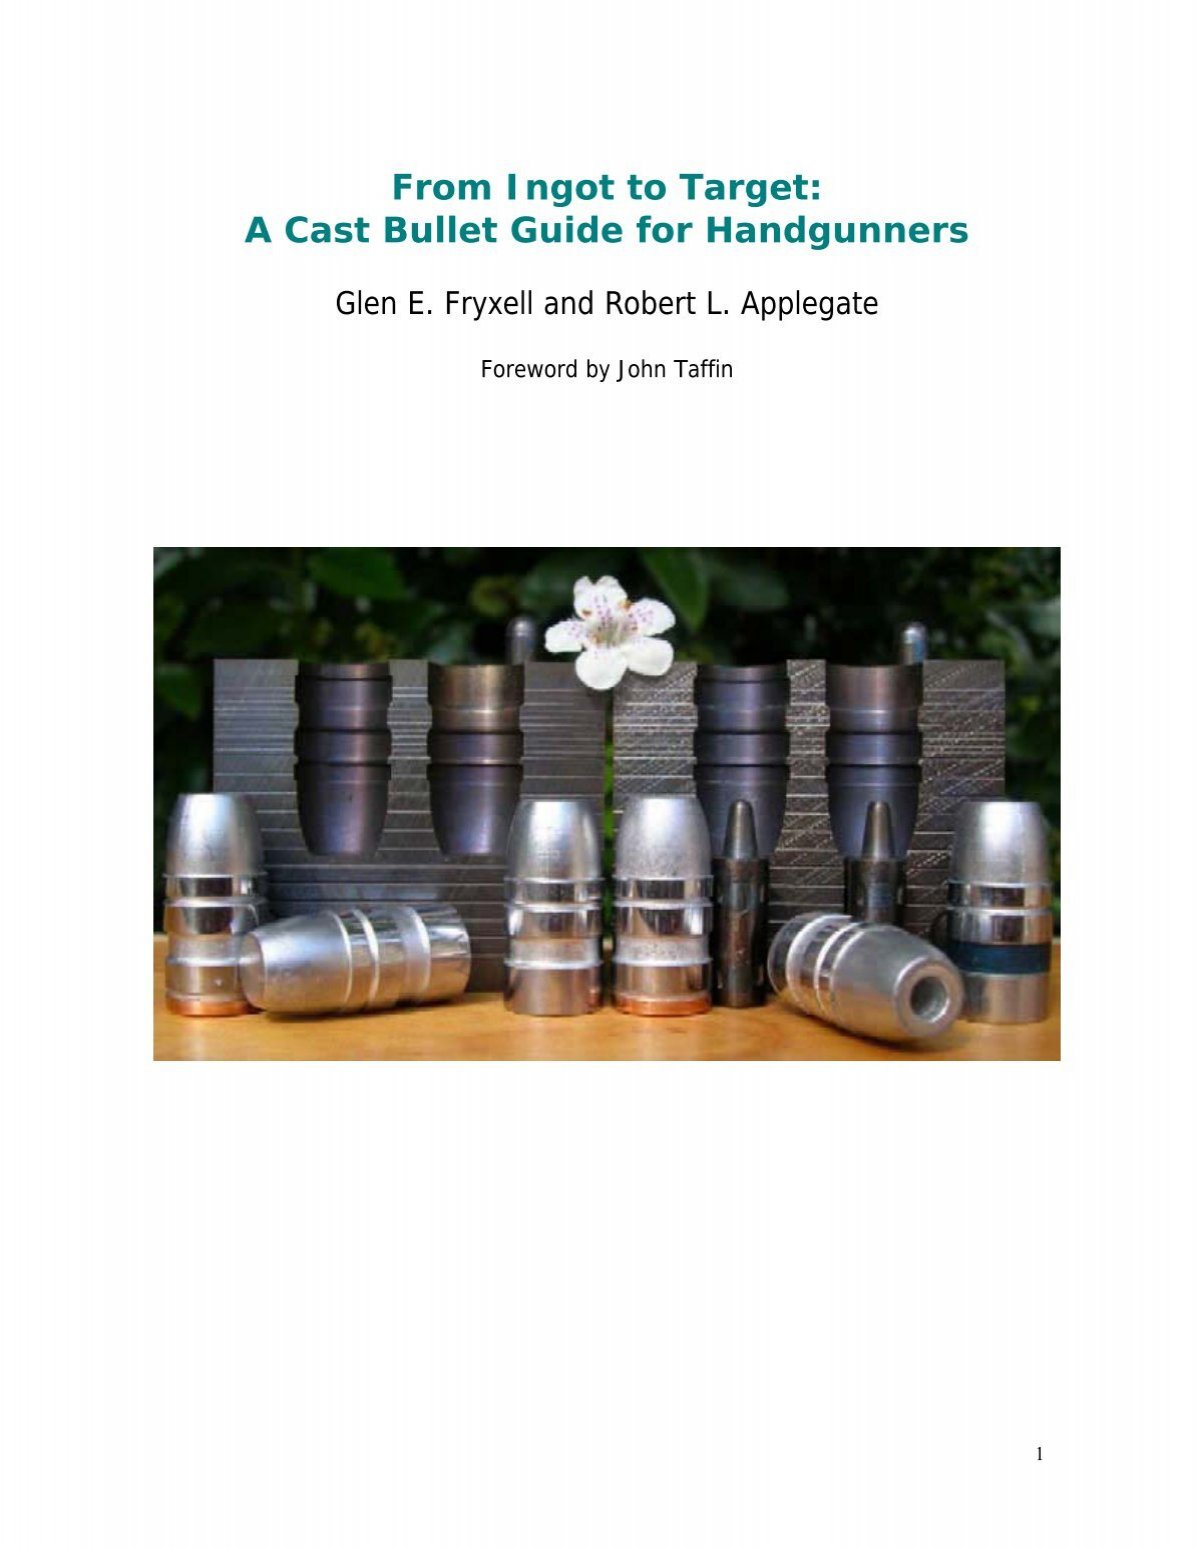 From Ingot to Target: A Cast Bullet Guide for  - LASC Front Page